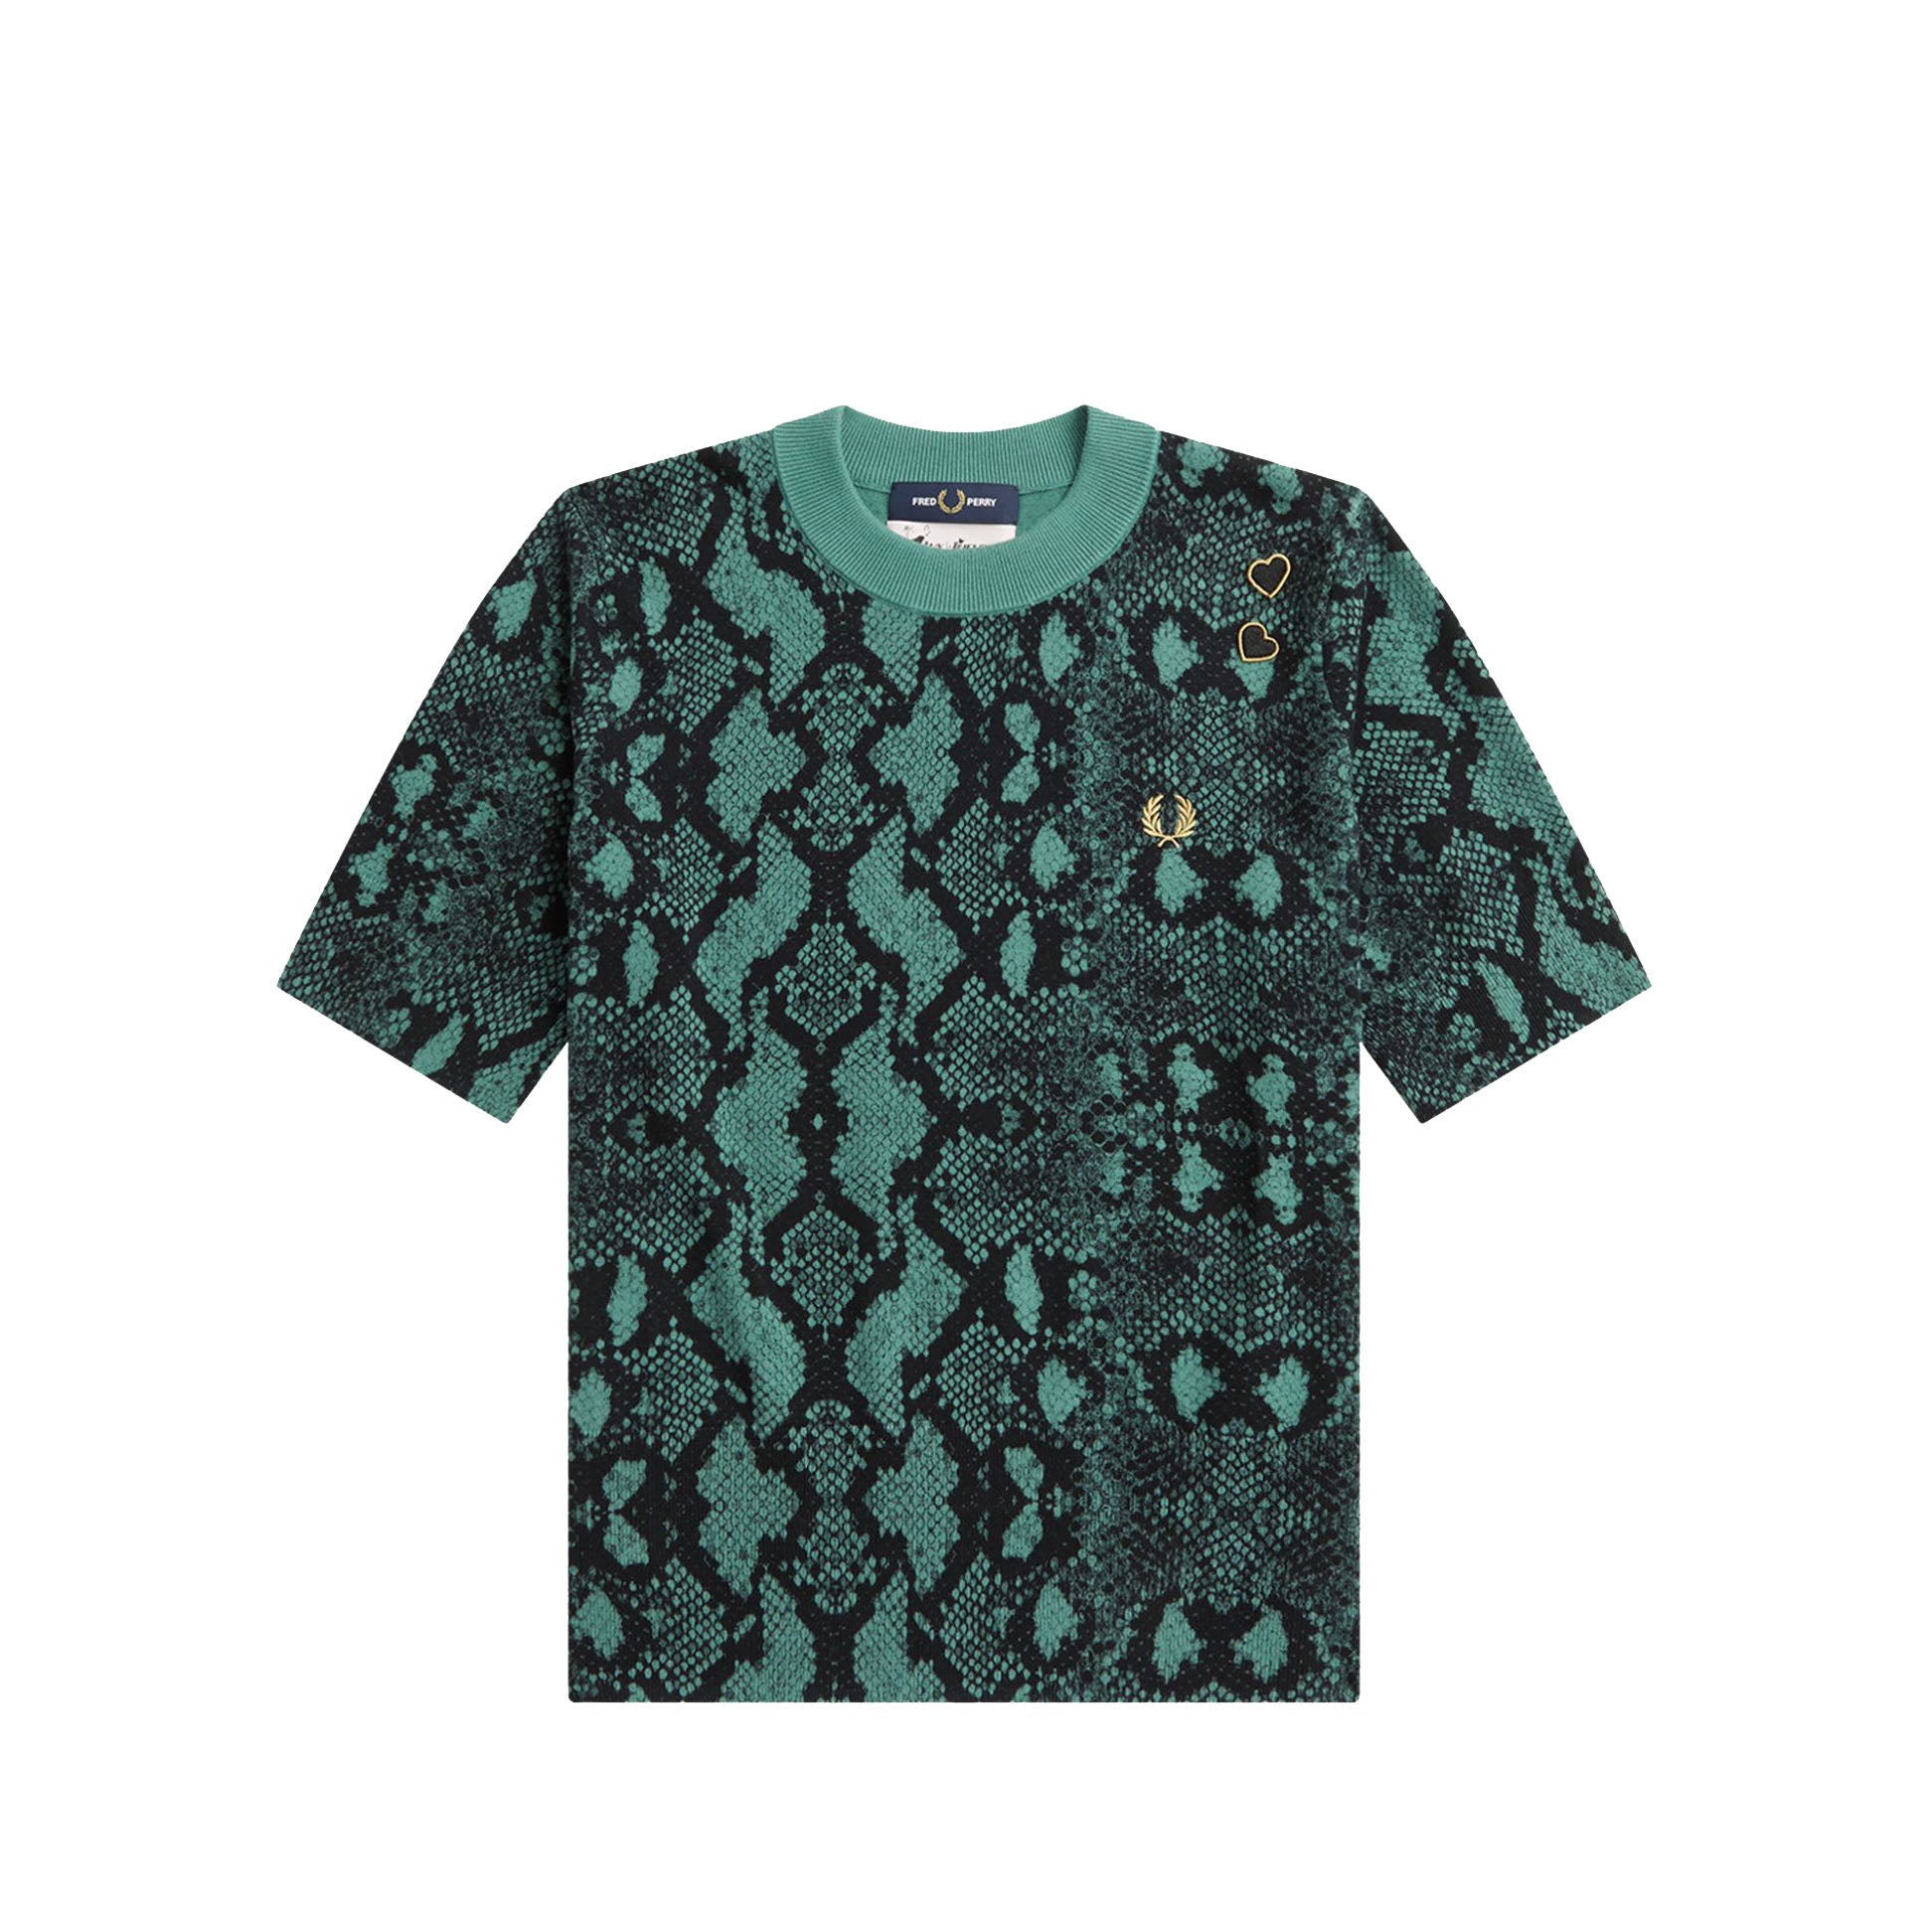 Fred Perry x Amy Winehouse Snake Print Jumper